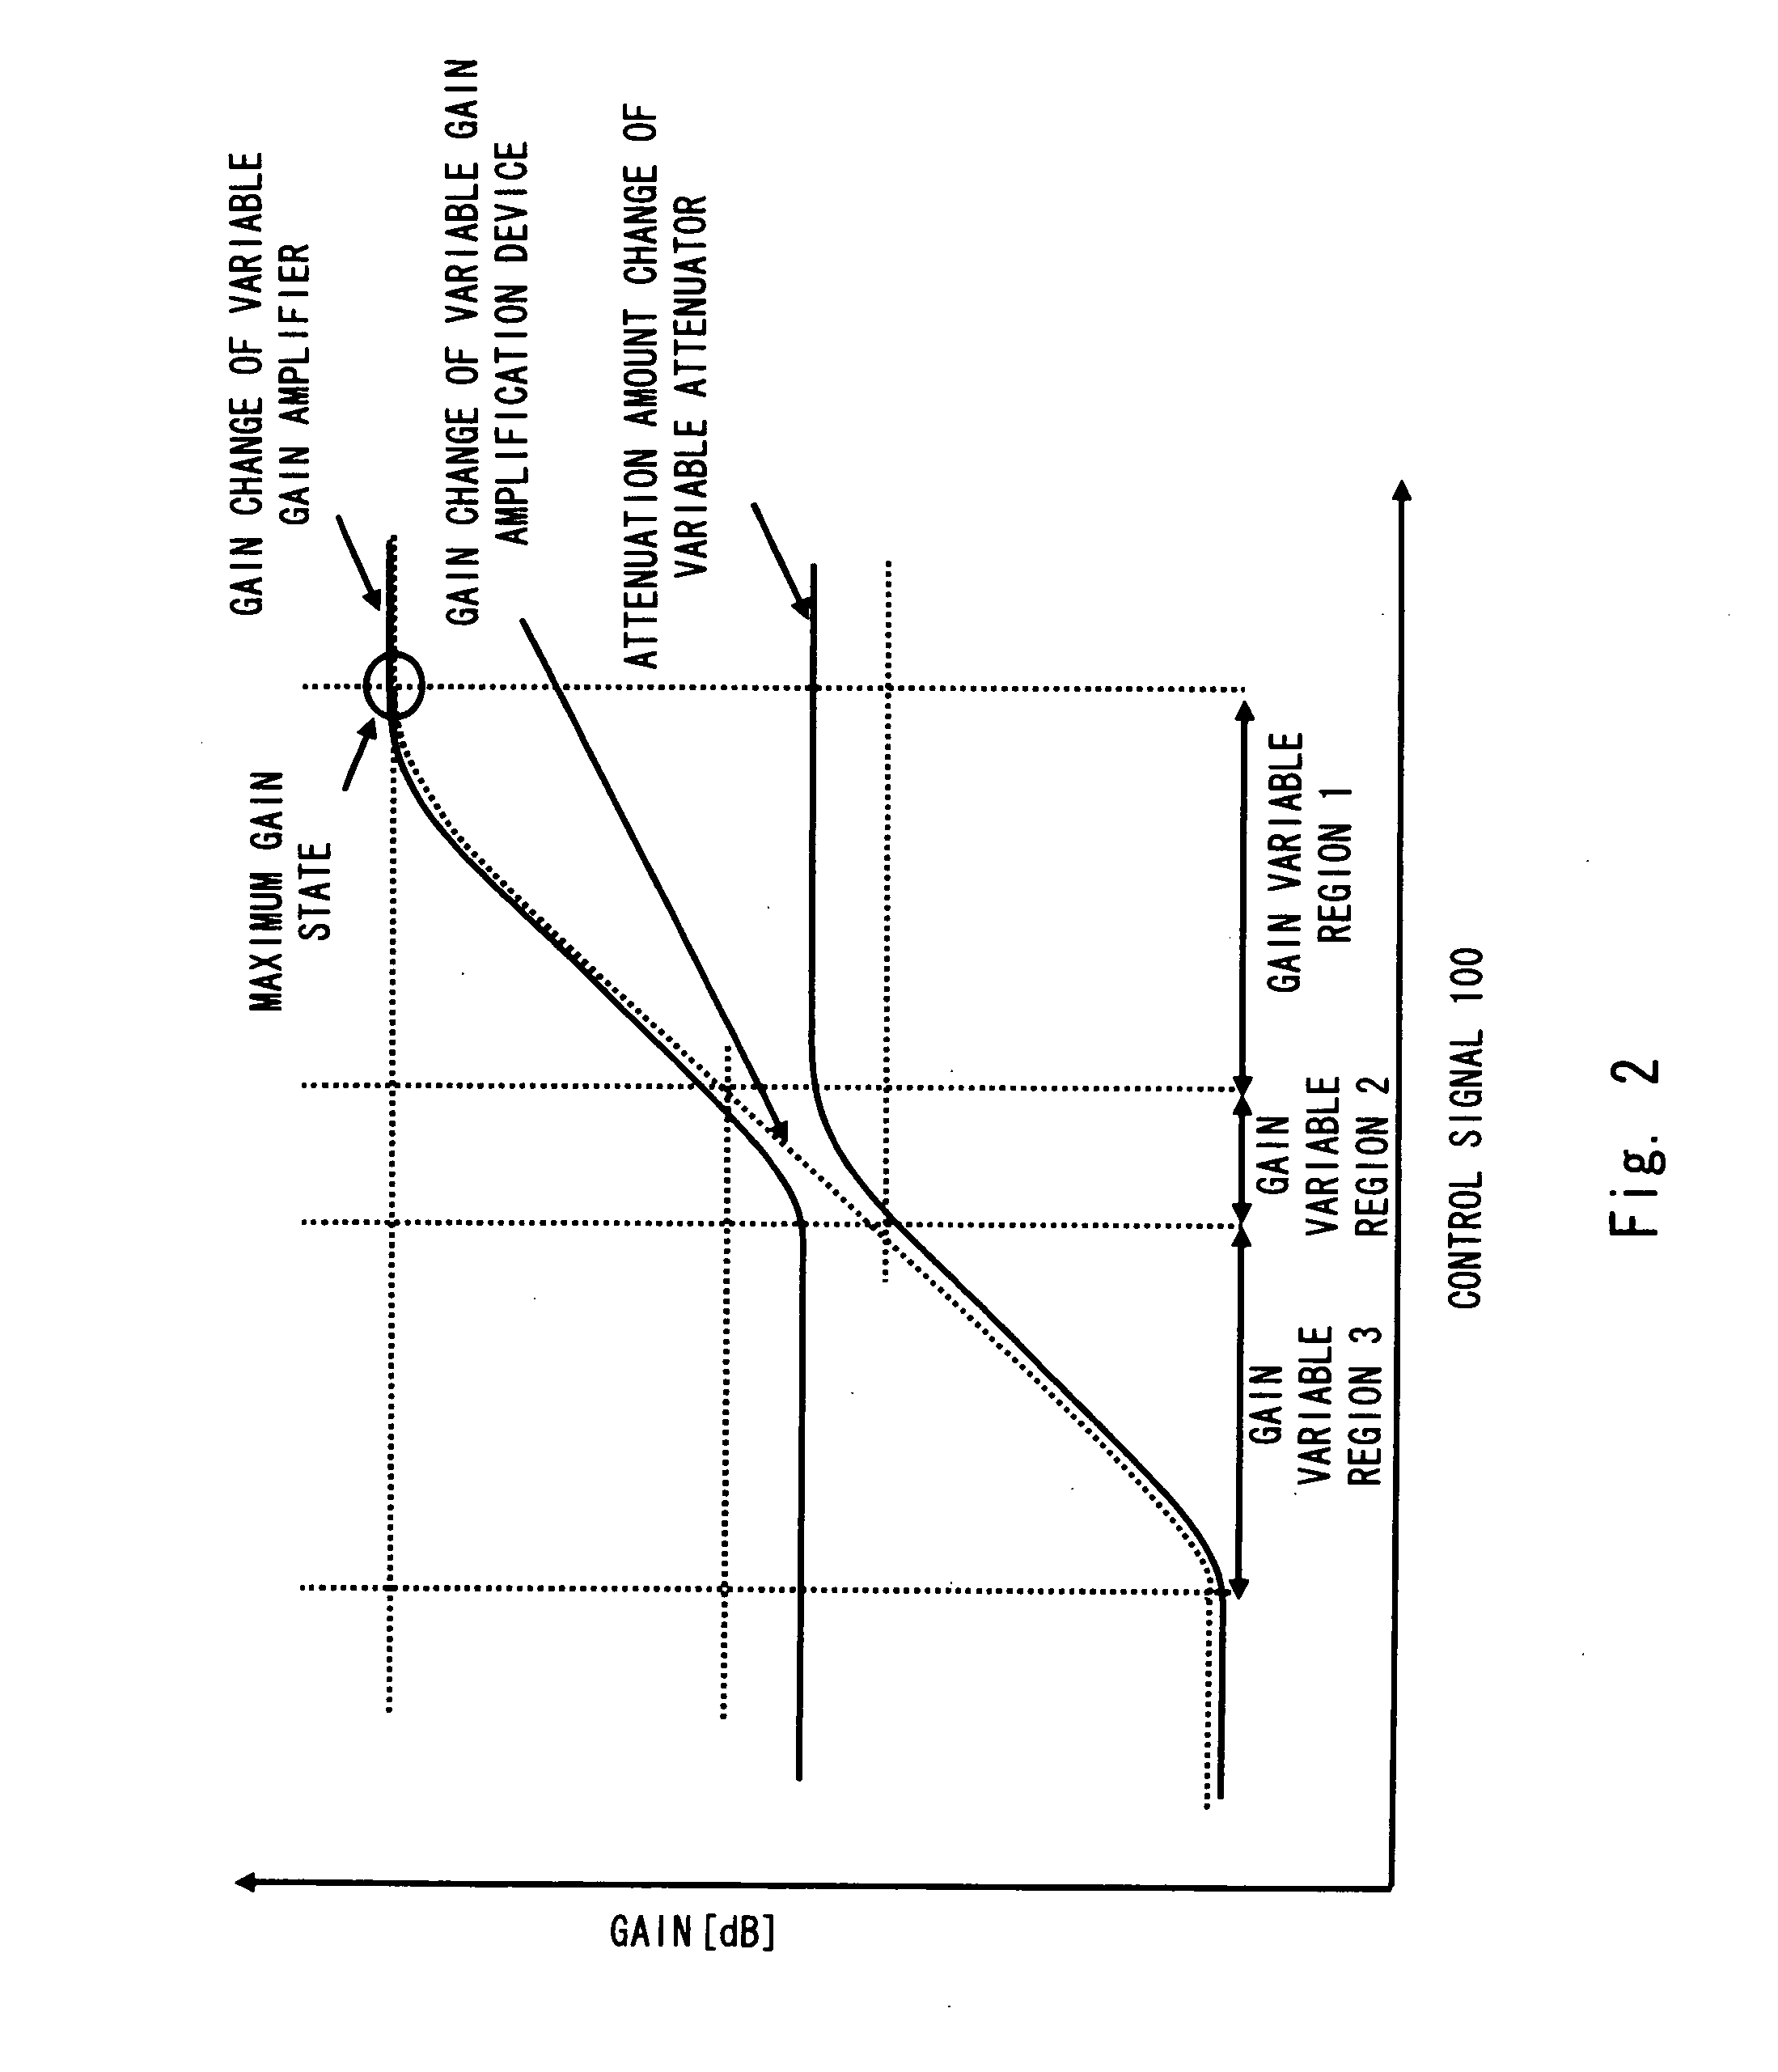 Variable gain amplification device